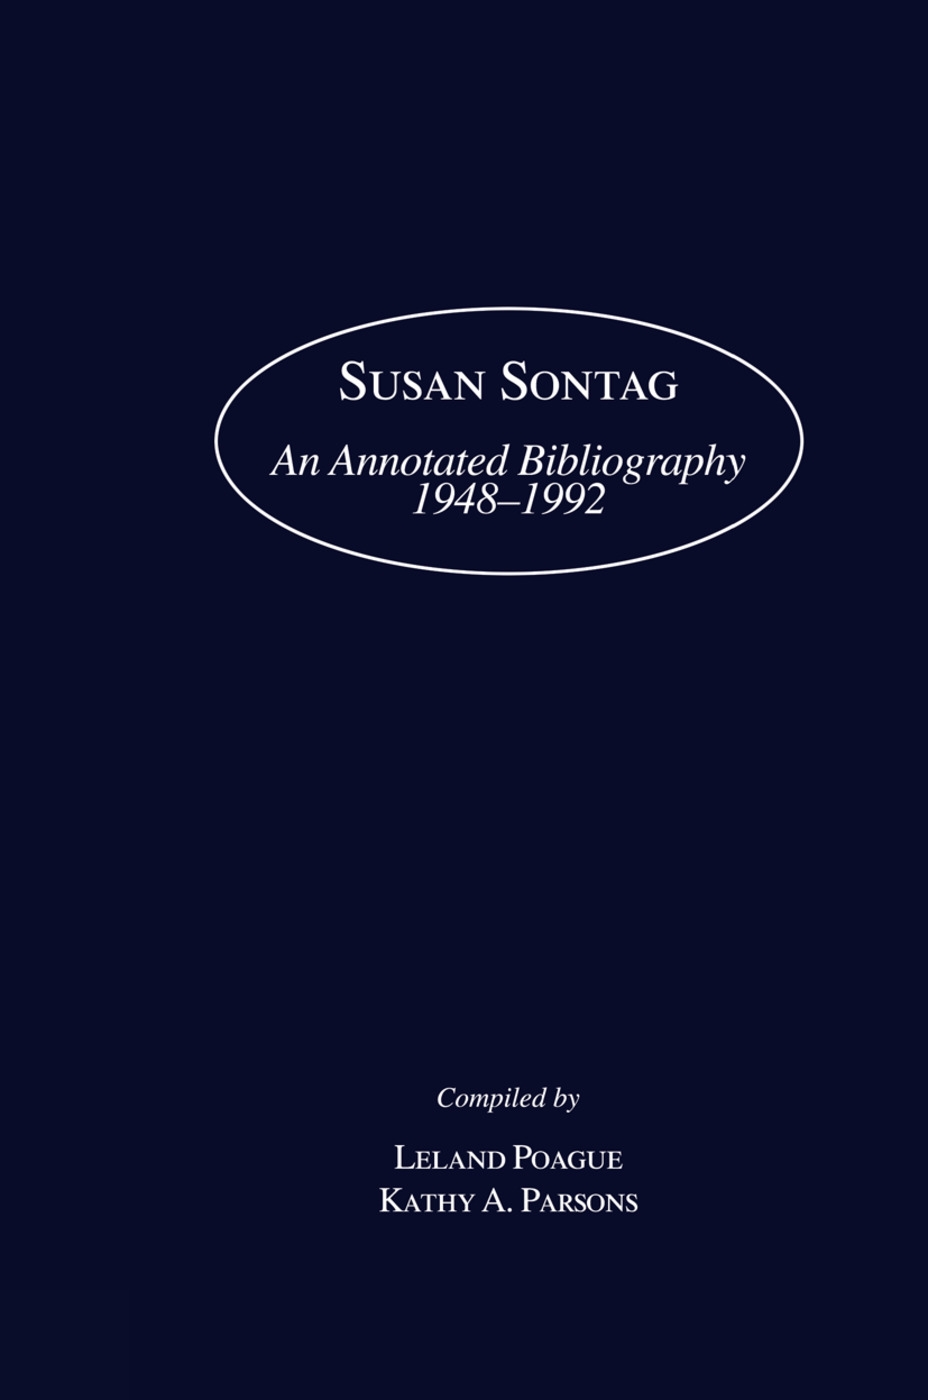 Susan Sontag: An Annotated Bibliography, 1948-1992